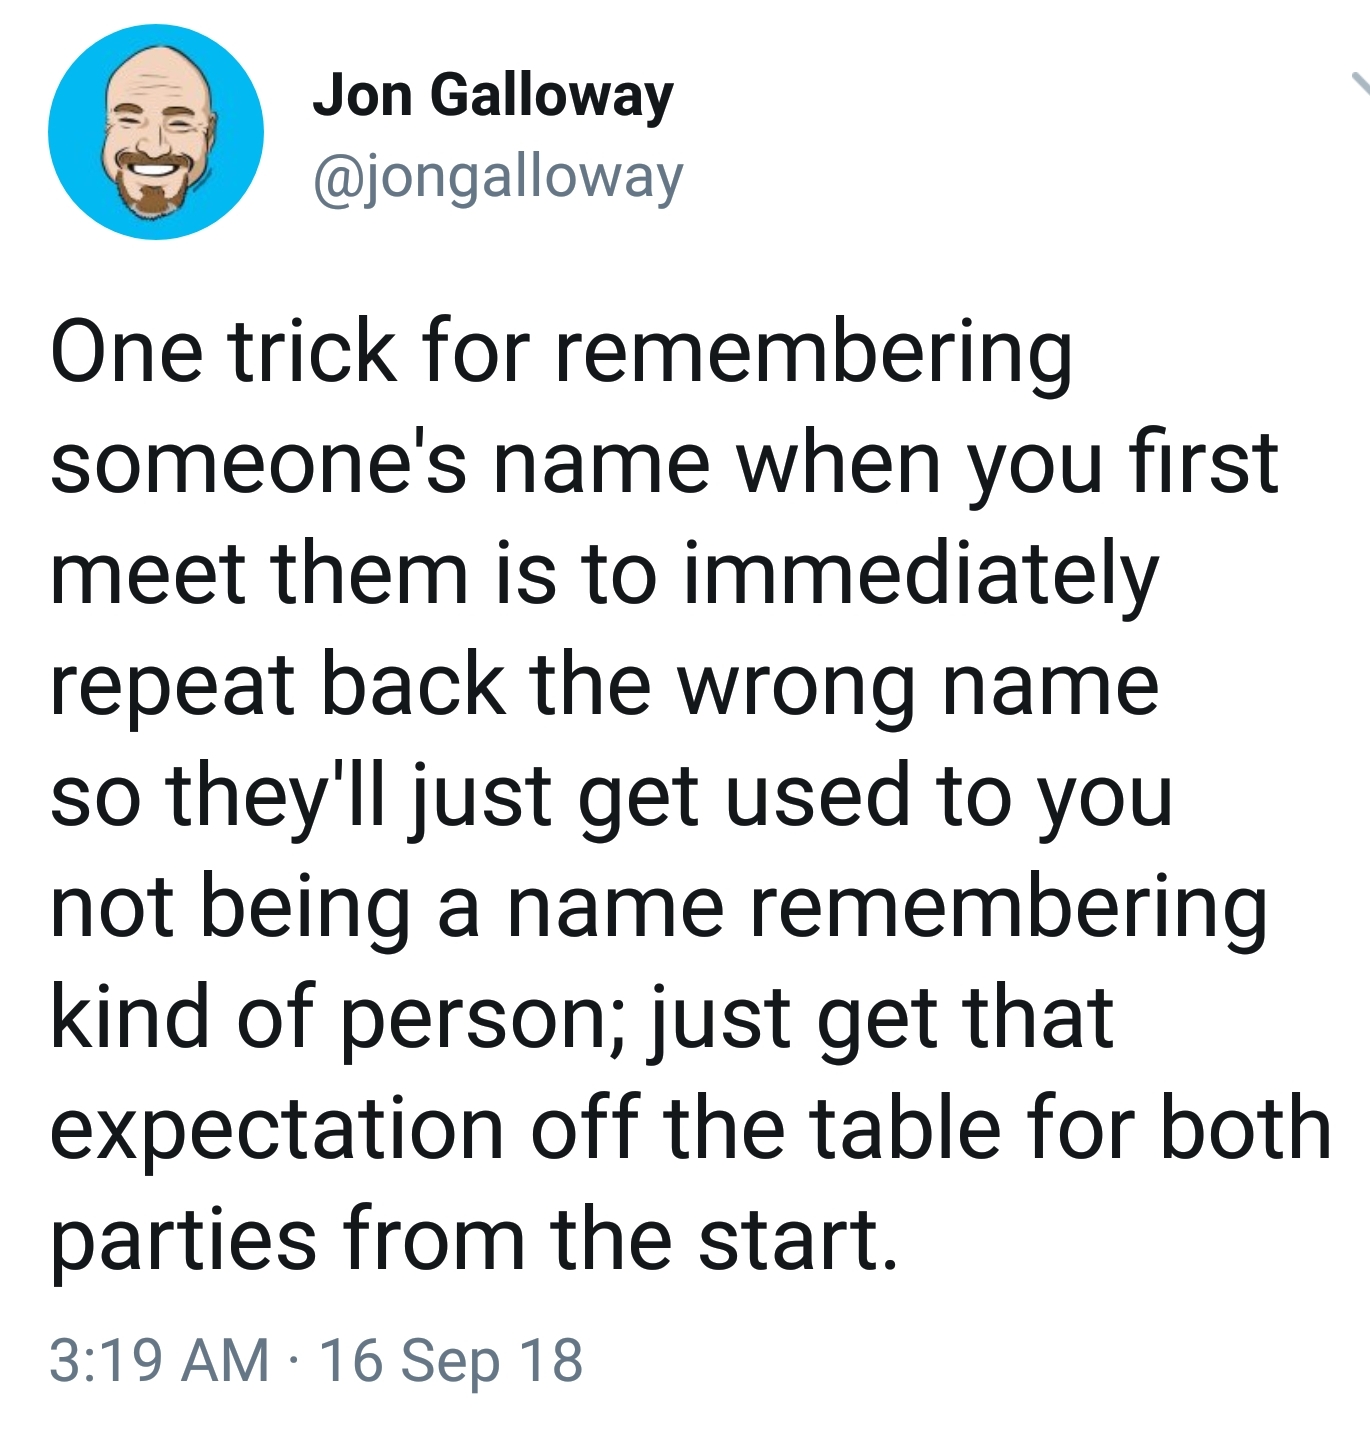 memes  - document - Jon Galloway One trick for remembering someone's name when you first meet them is to immediately repeat back the wrong name so they'll just get used to you not being a name remembering kind of person; just get that expectation off the 